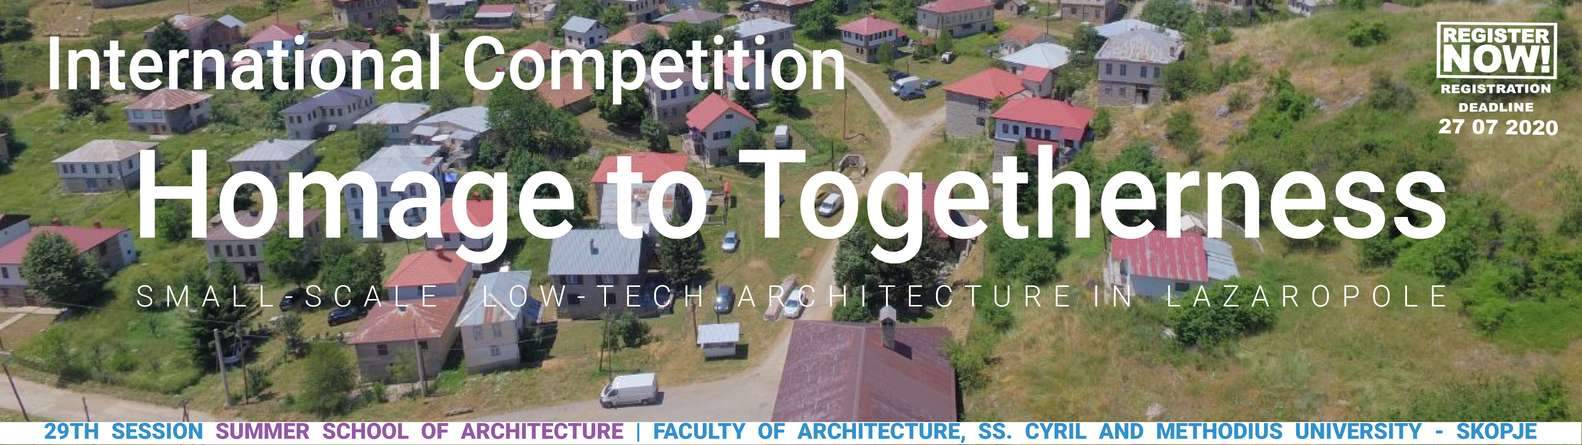 Open Call: Homage to Togetherness | Small-scale Low-tech Architecture in Lazaropole